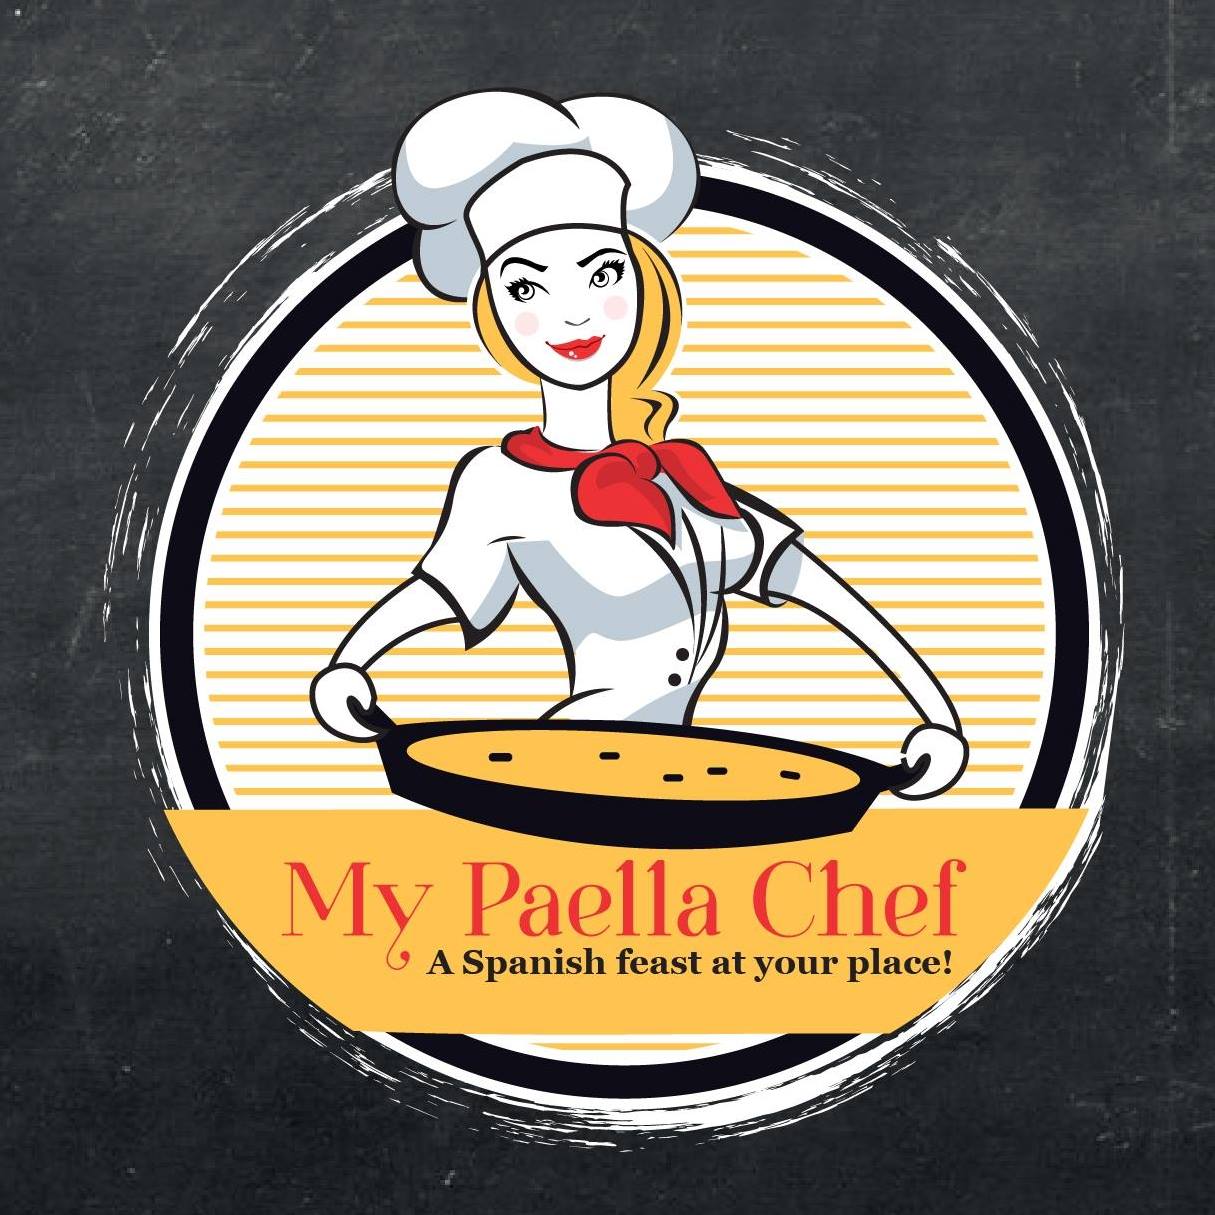 Drawing of a blond woman in a chef's outfit holding a black pan.